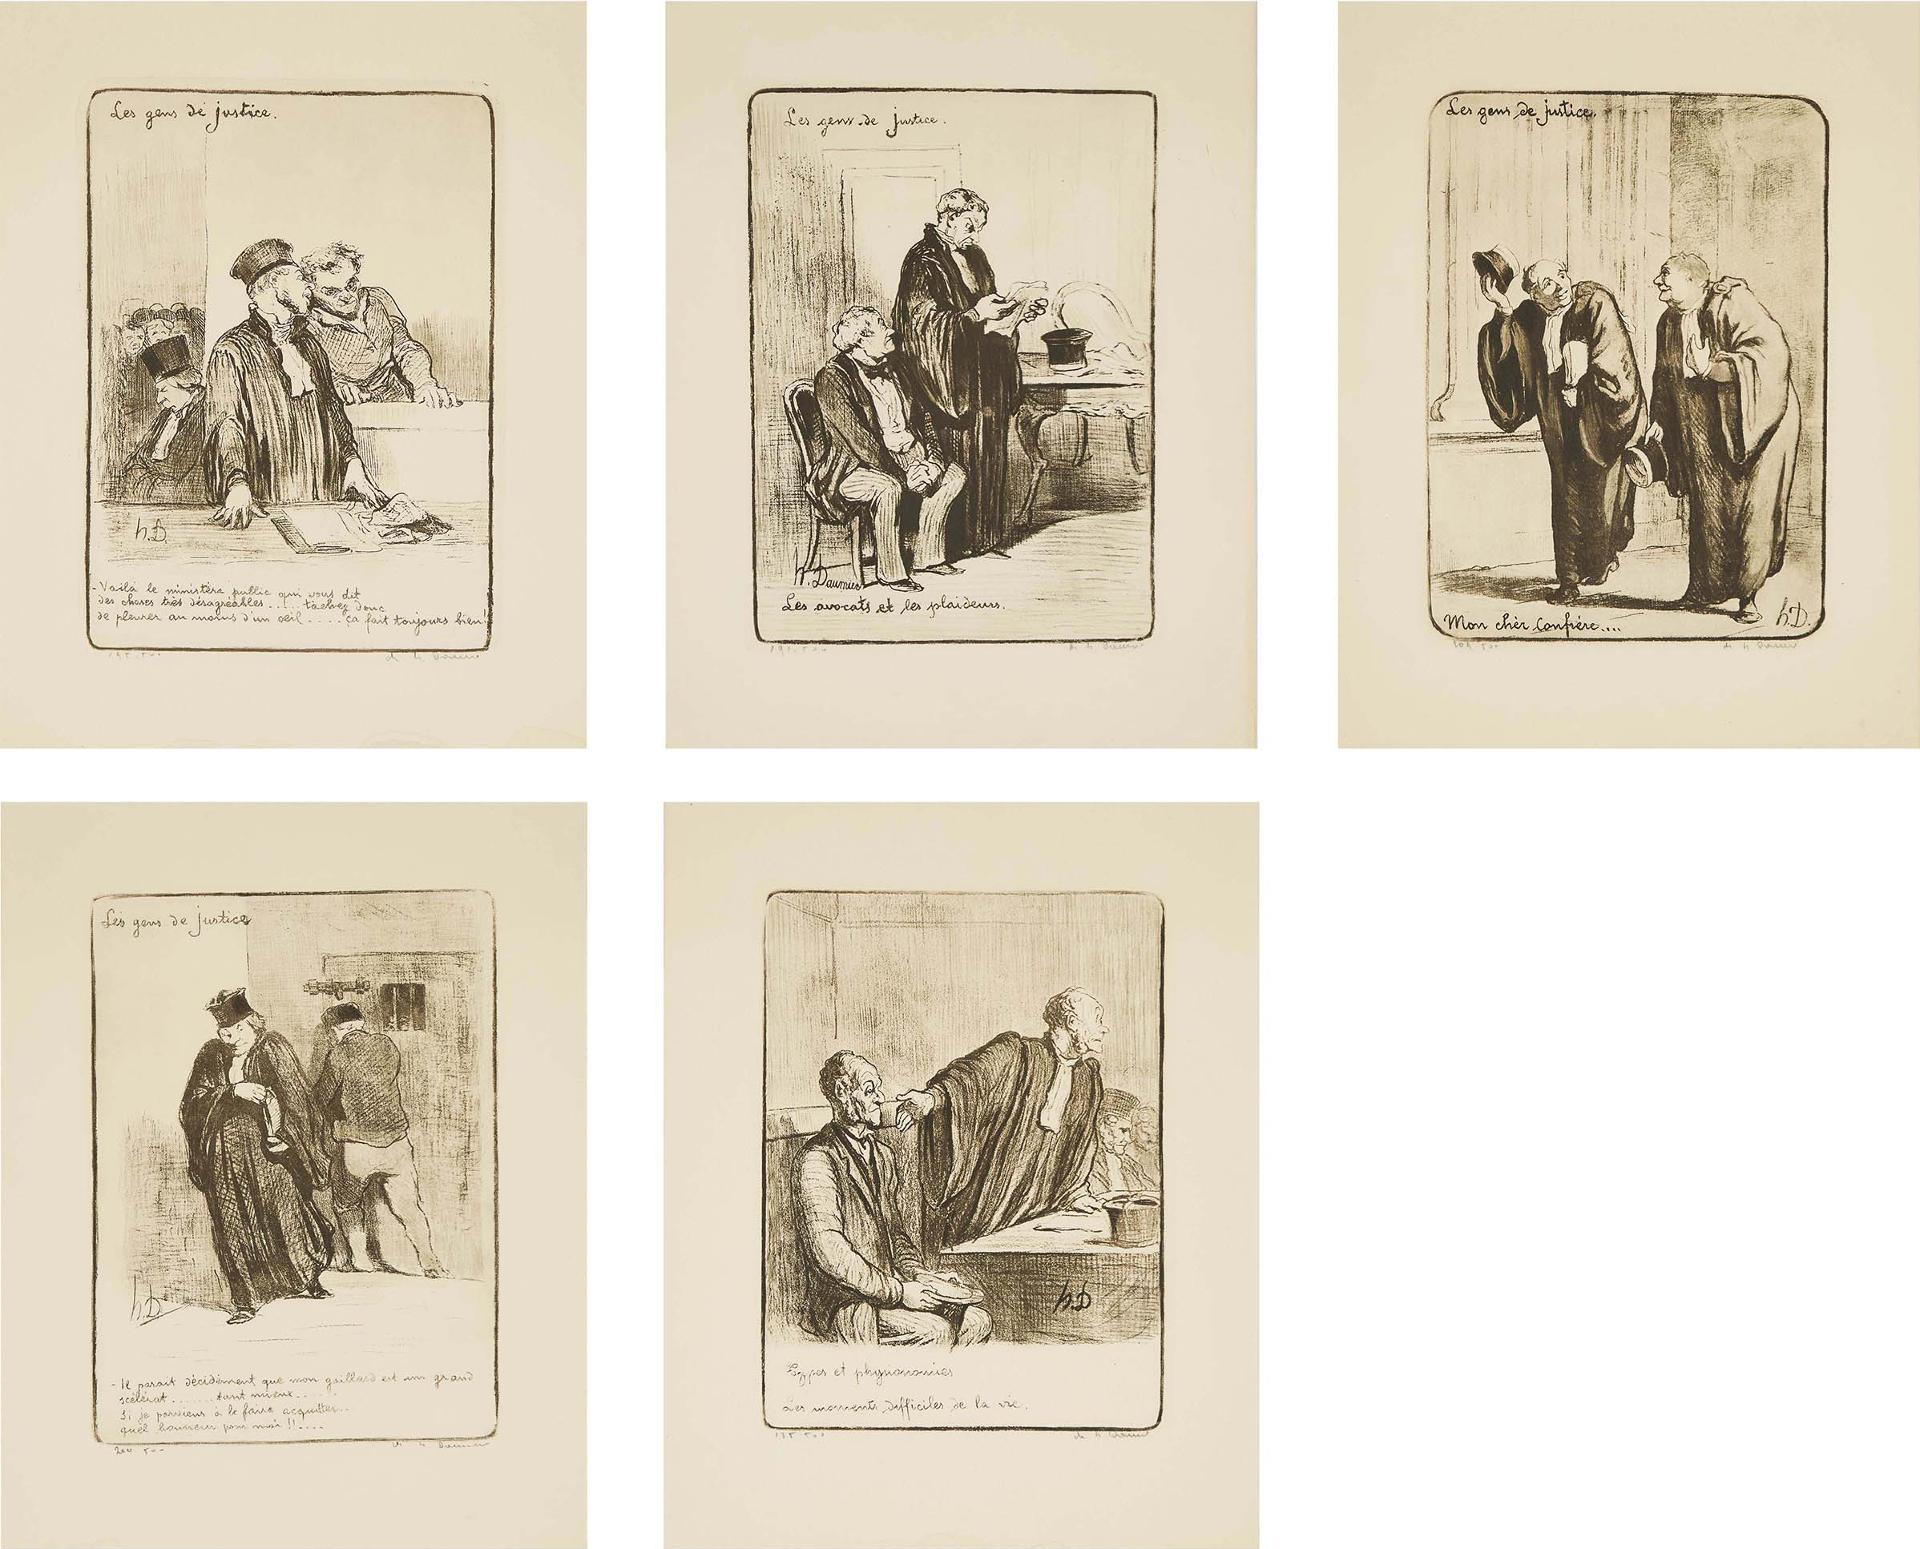 Honoré Daumier (1808-1879) - Suite Of Five Lithographs From 